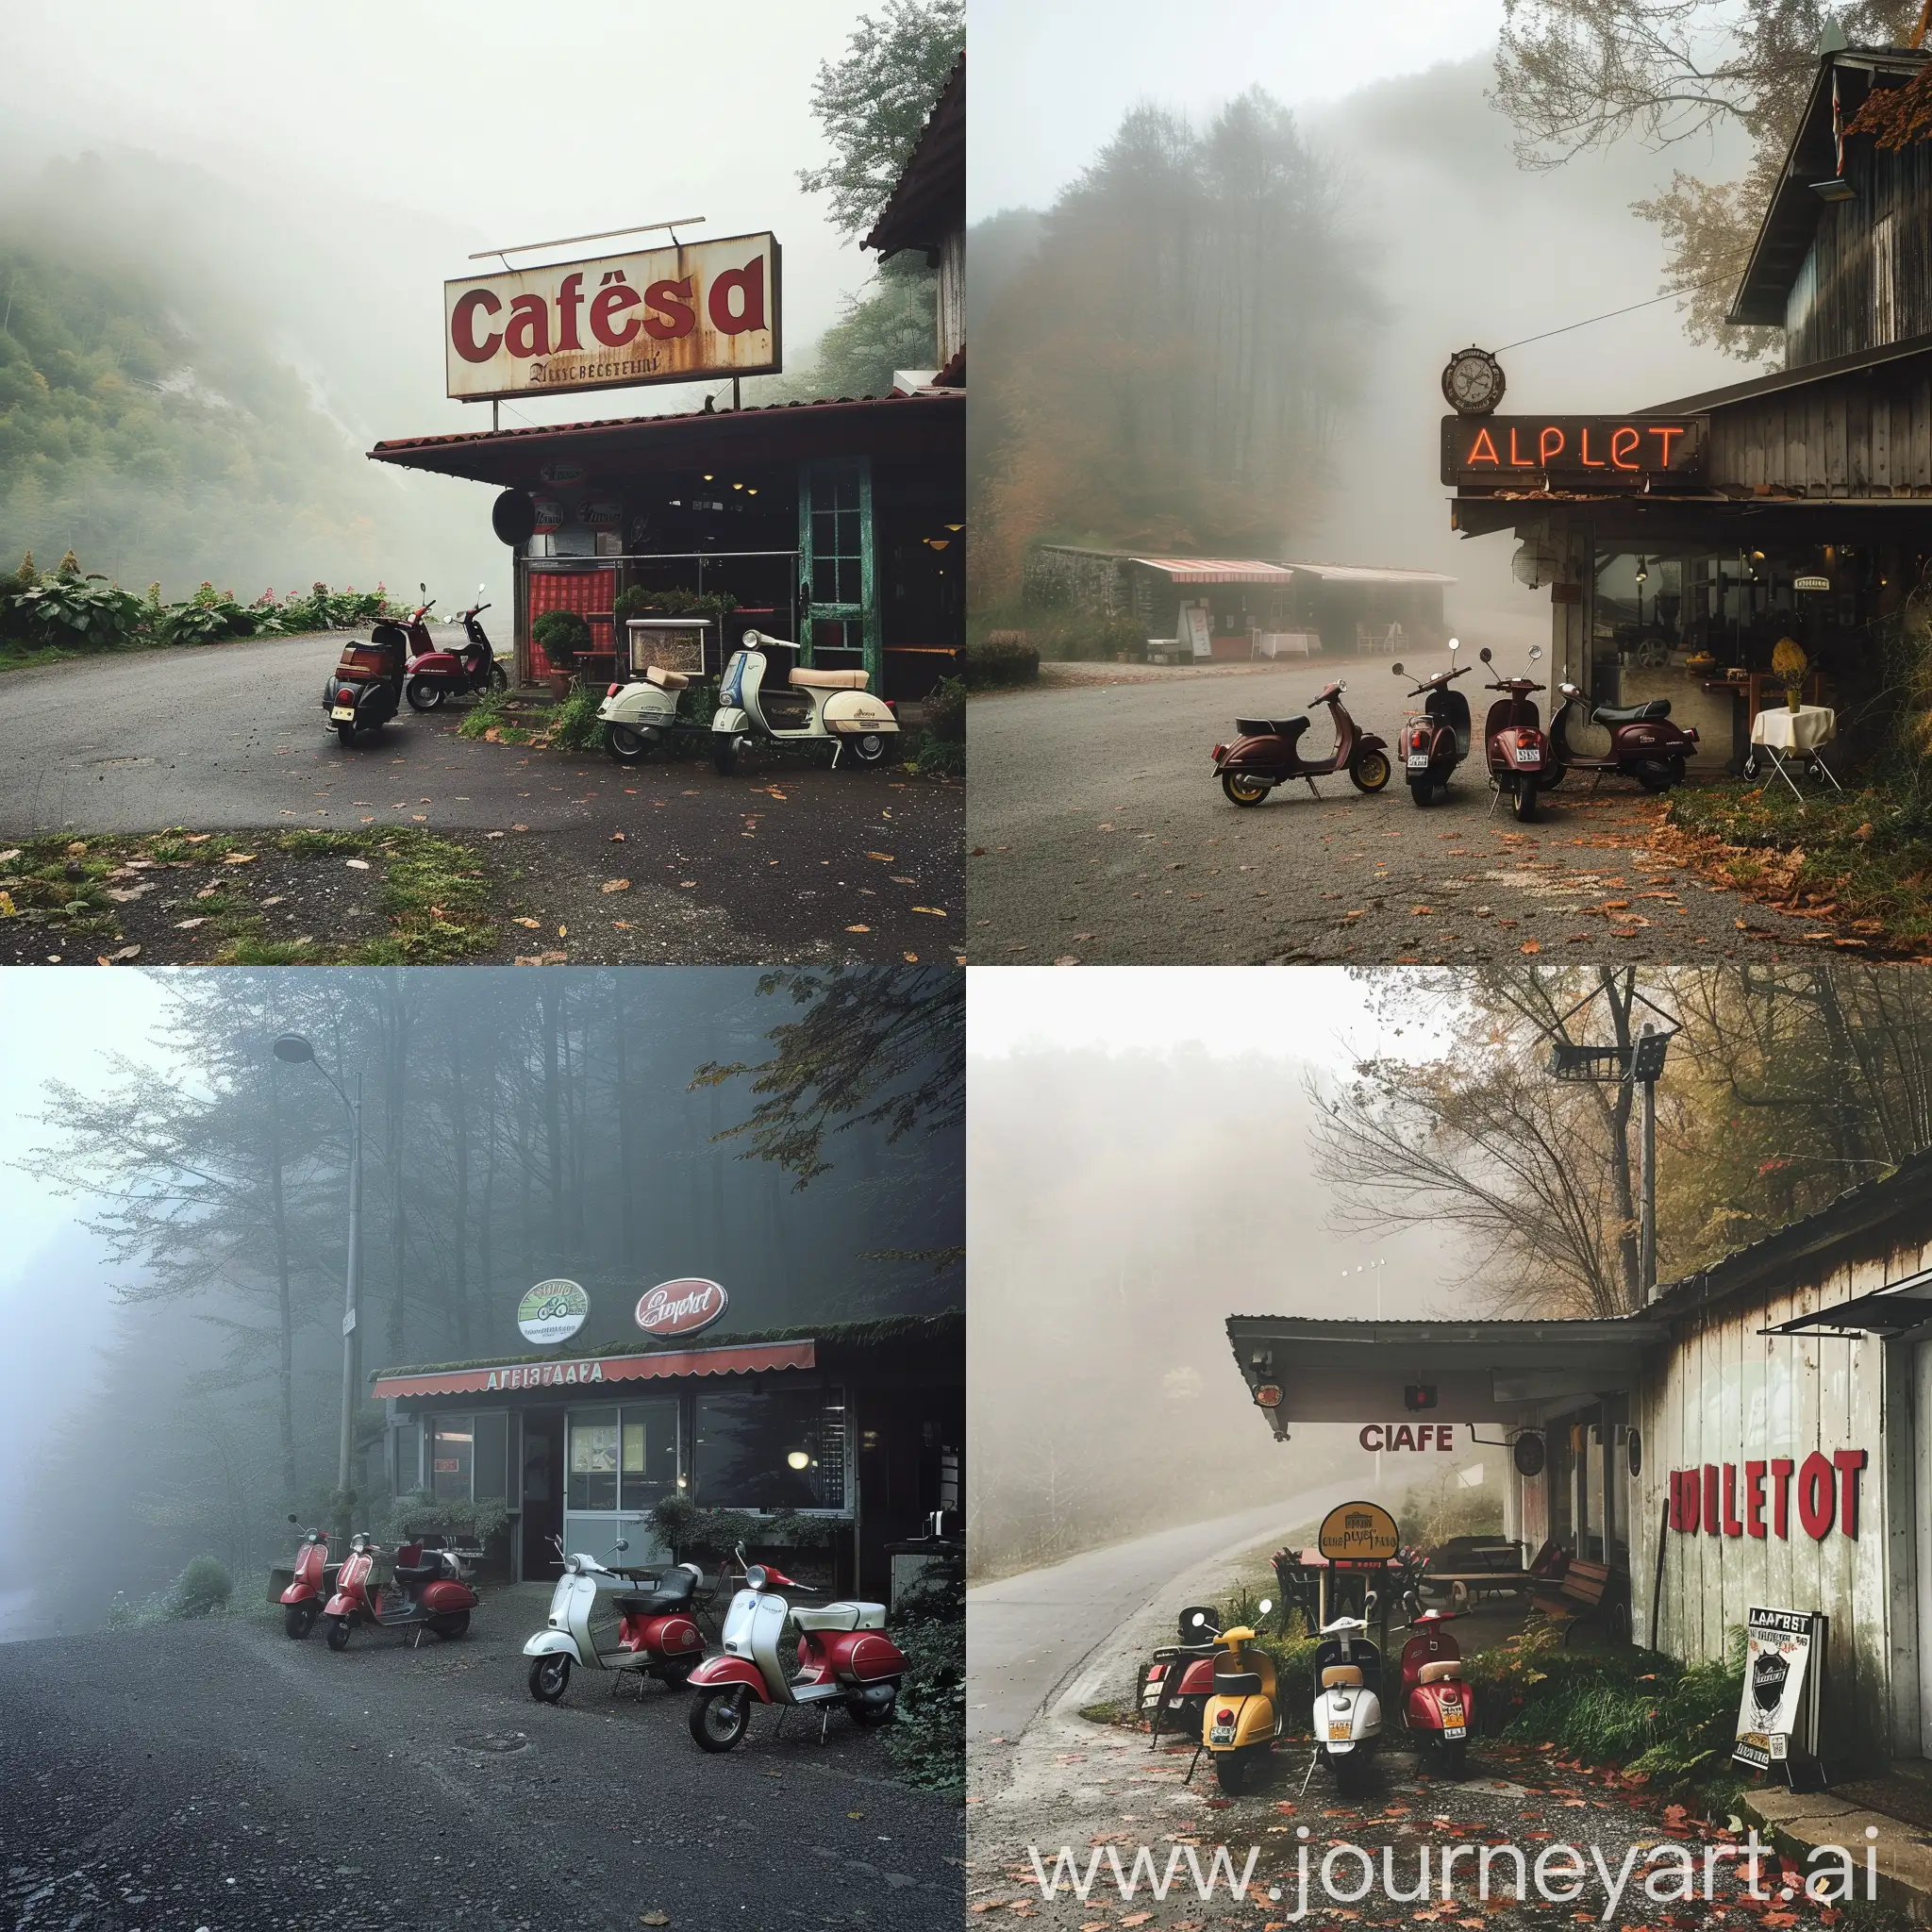 Charming-Roadside-Cafe-in-a-Misty-Scene-with-Vintage-Lambretta-Scooters